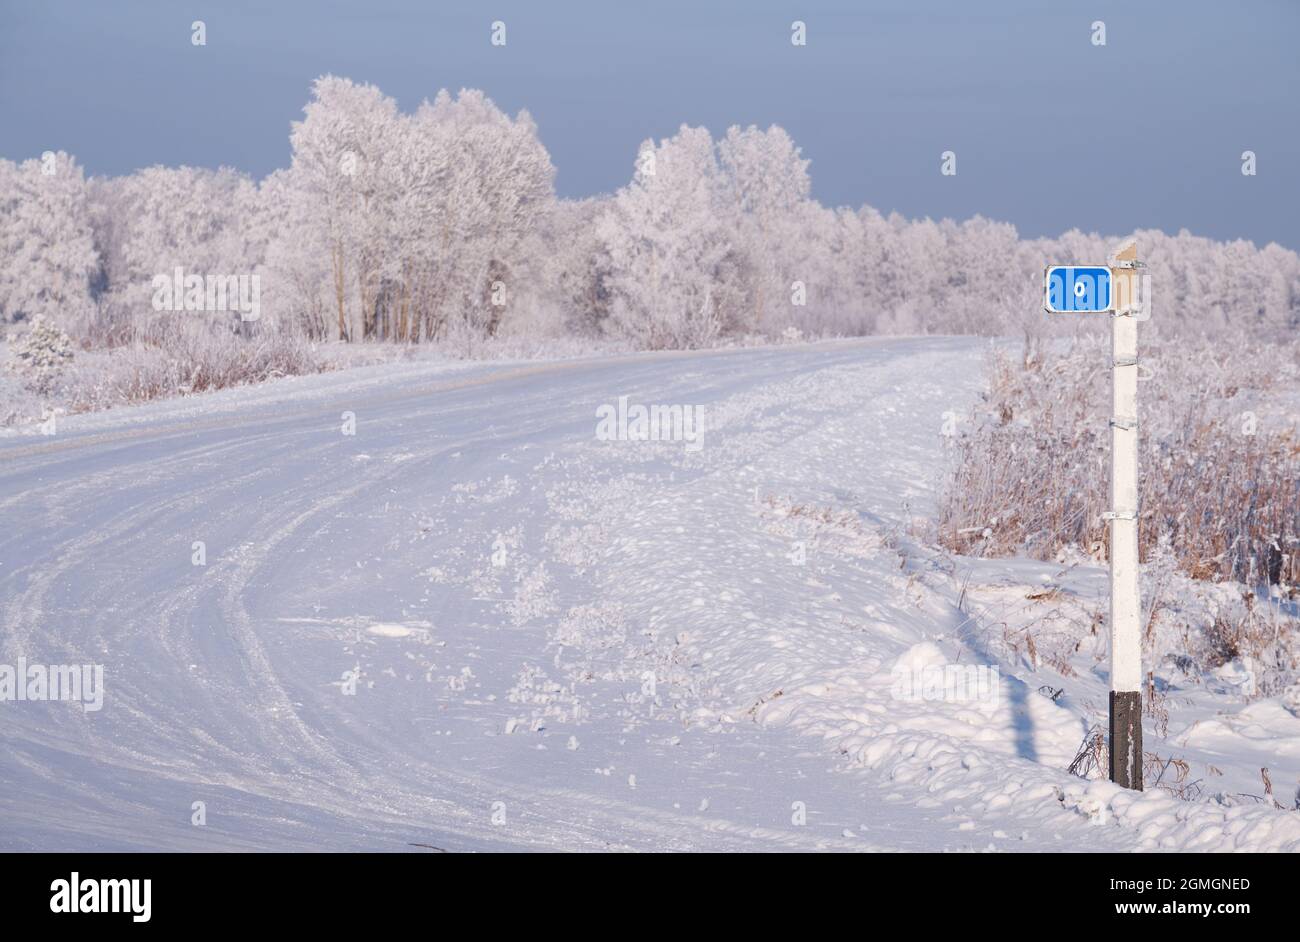 Winter road under snow. The beginning of the road with a zero kilometer sign. Siberian natural winter season landscape. Frozen birch trees covered wit Stock Photo